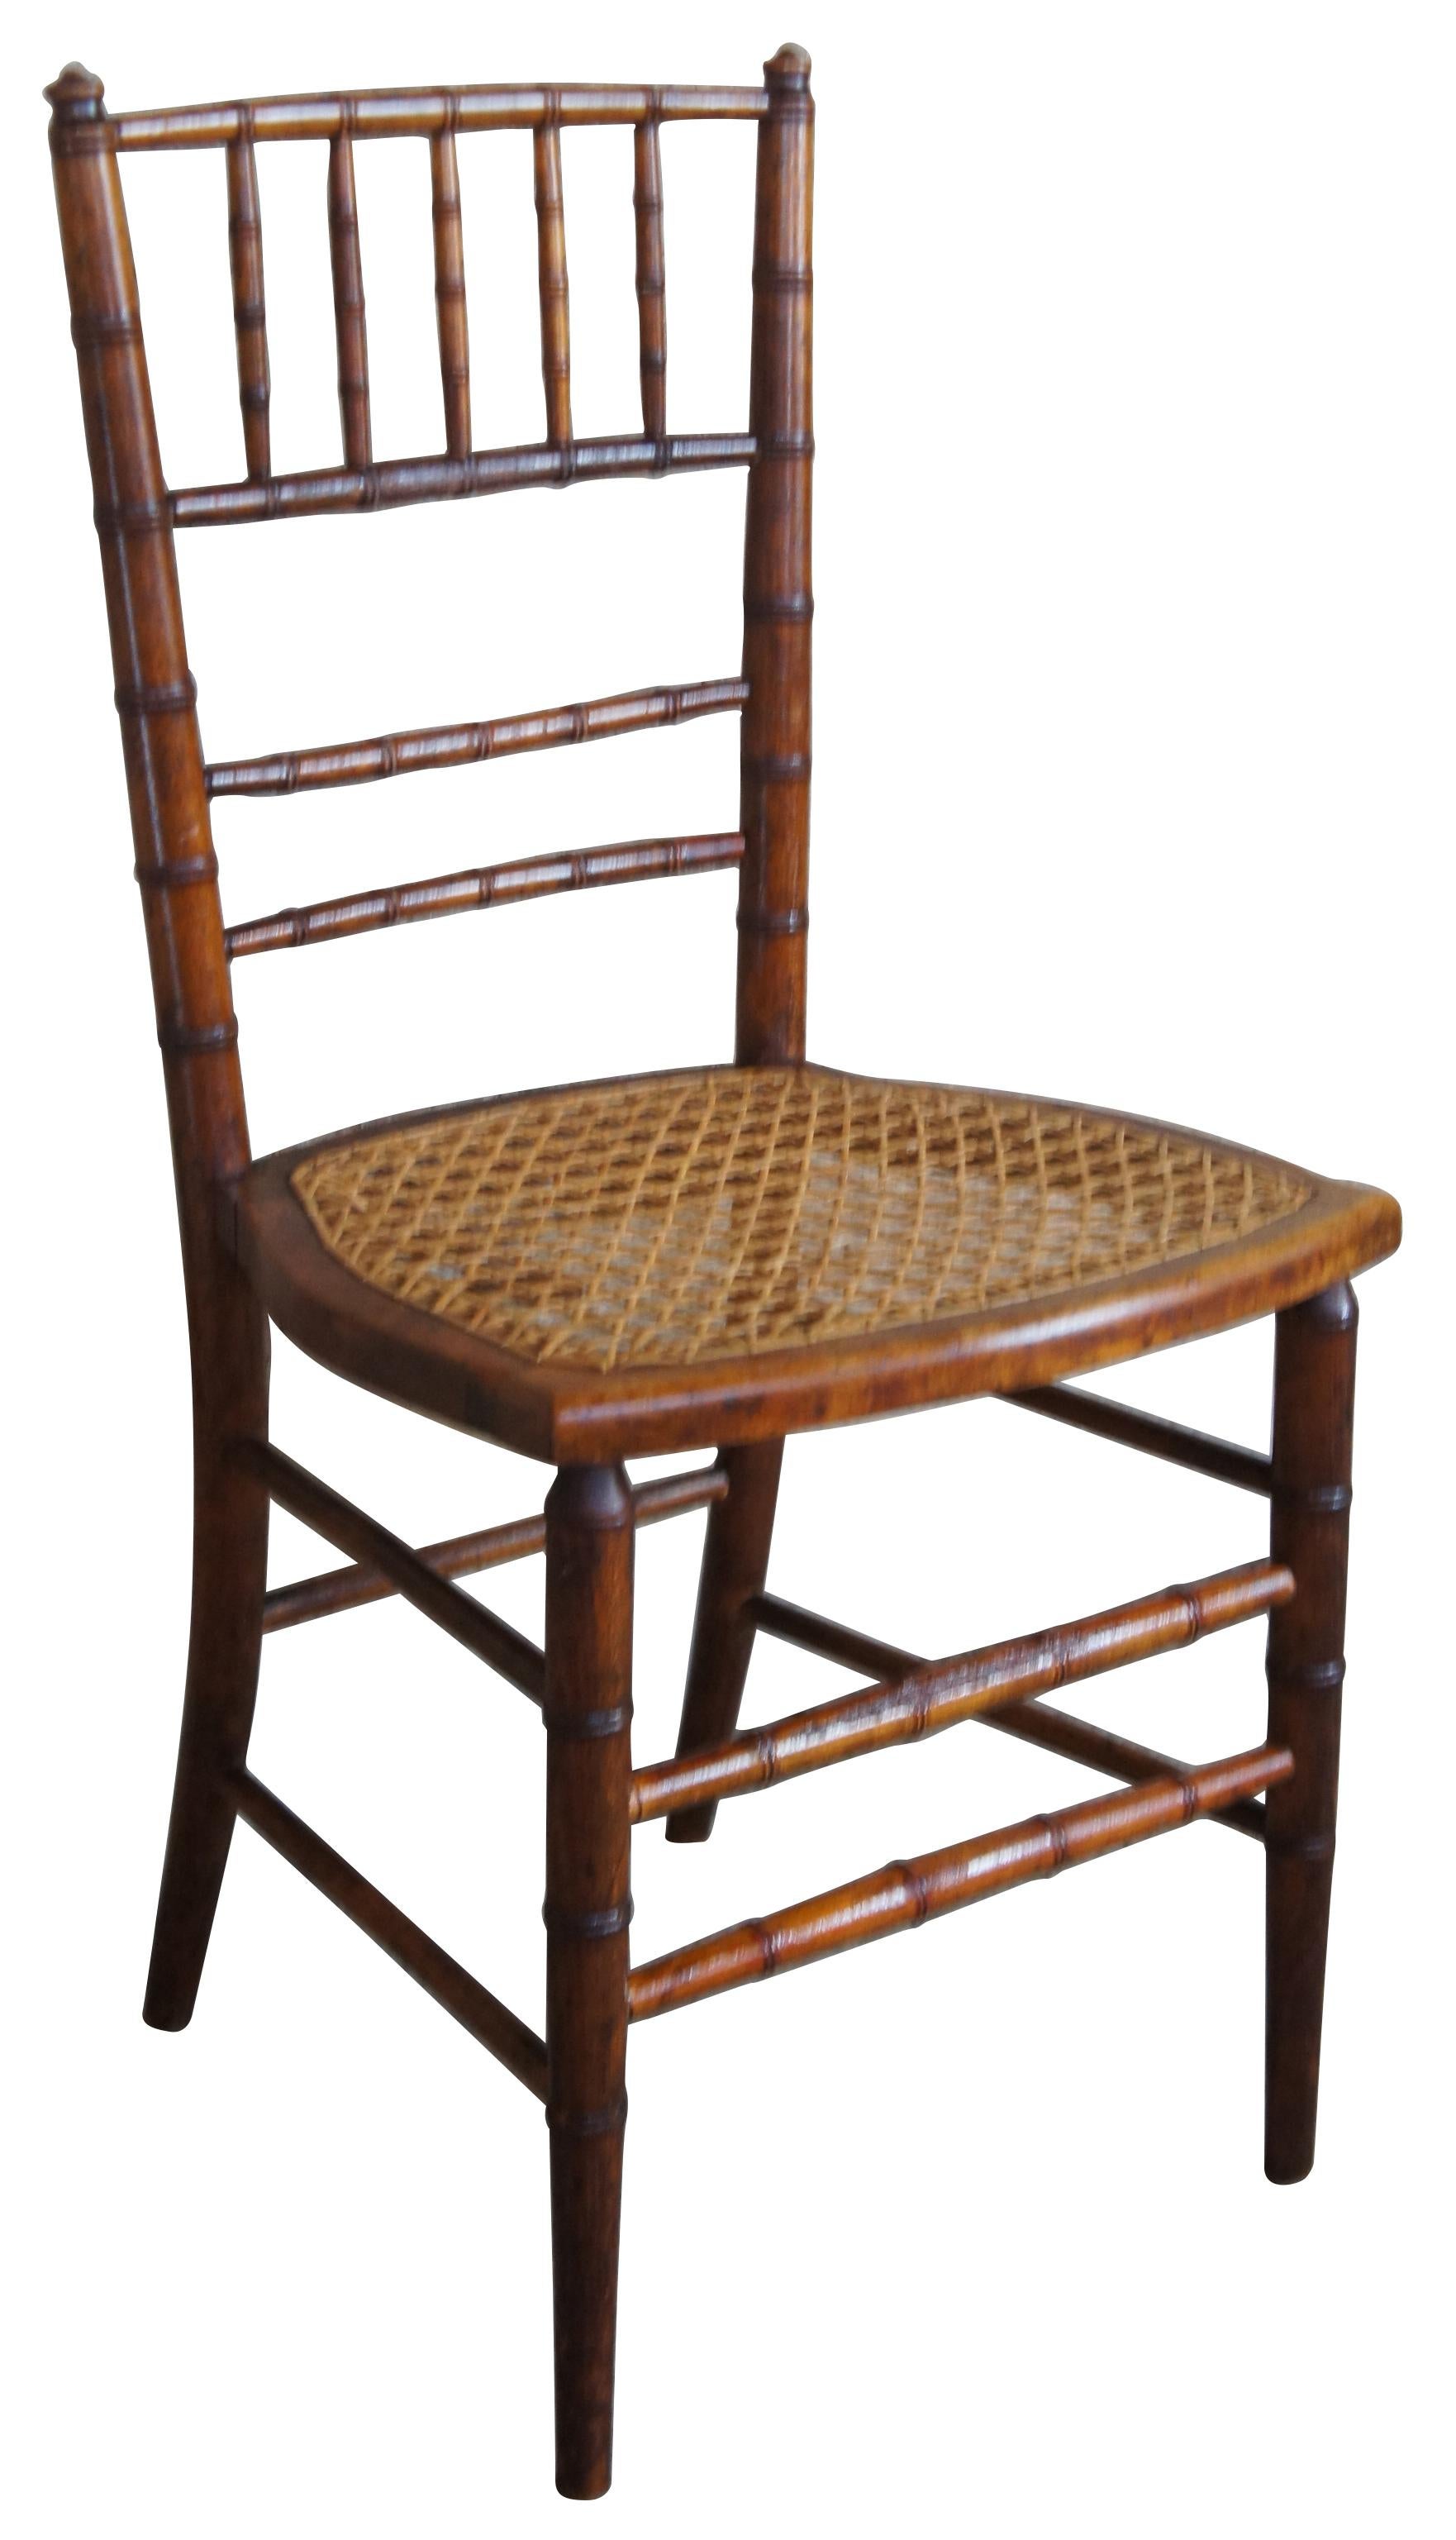 Late Victorian, British Colonial inspired side chair. Made from walnut with spindled bamboo like design and cane seat.
  